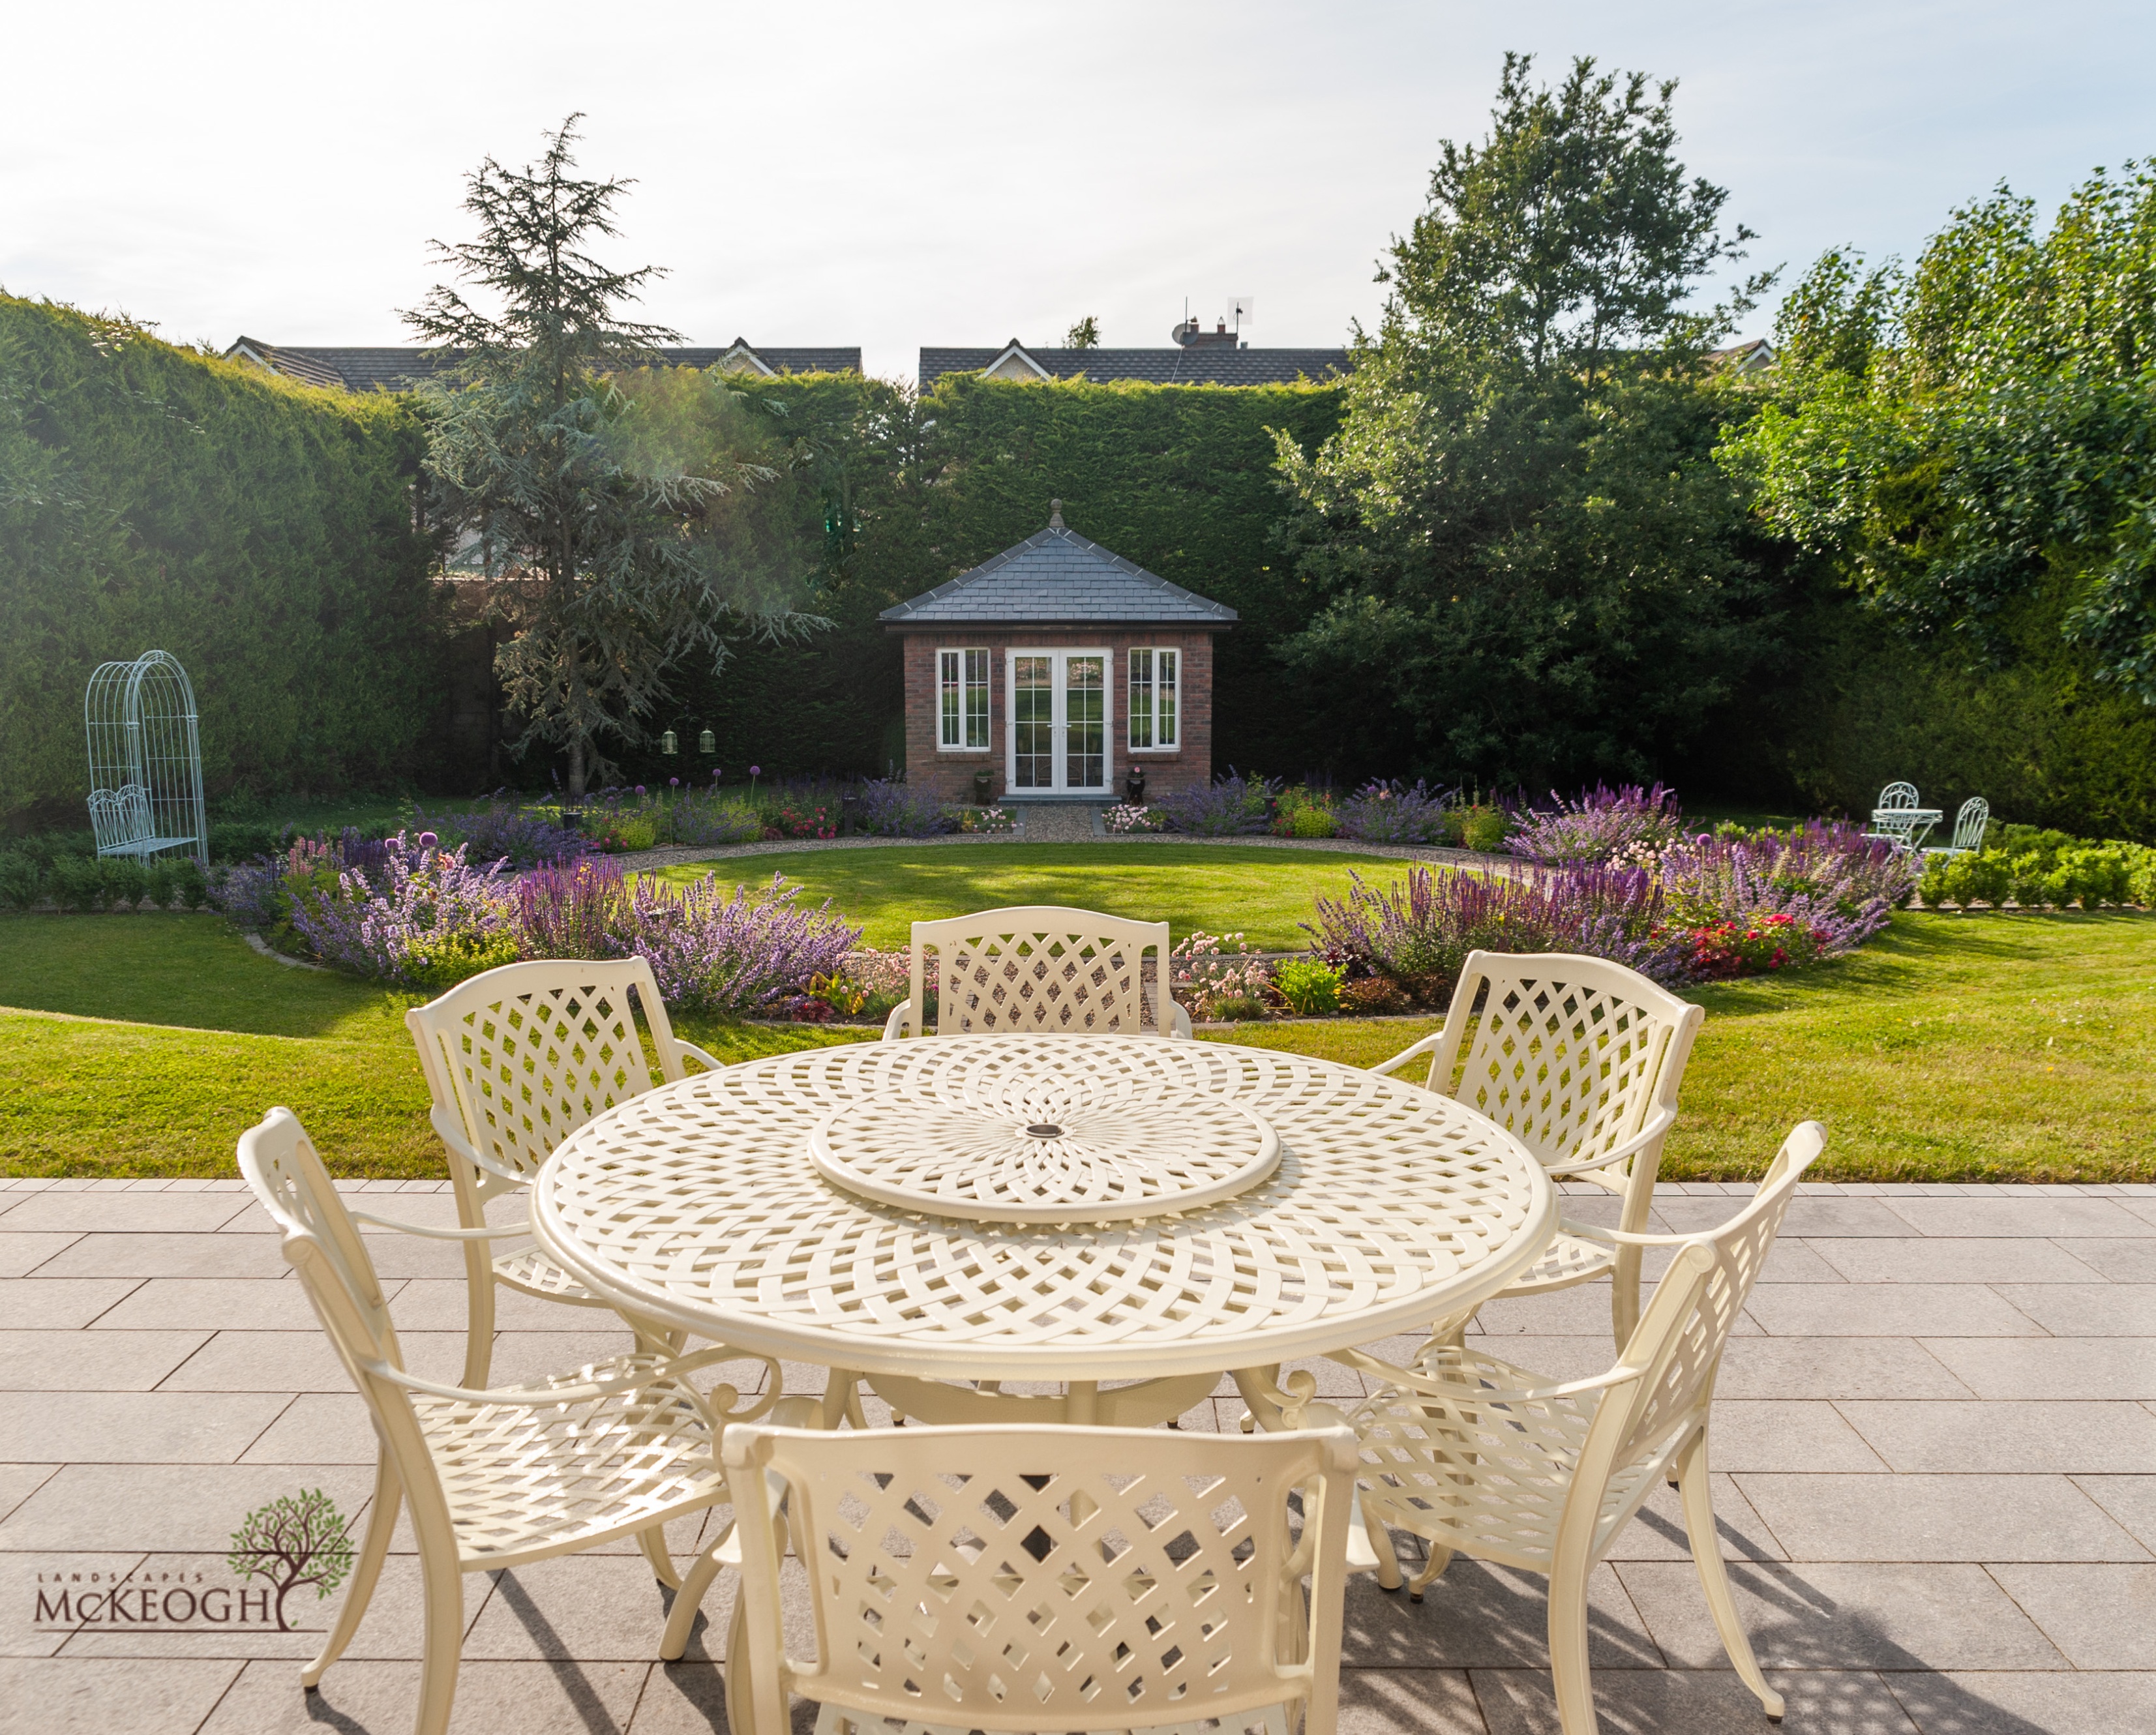 Classical garden design and landscaping in limerick